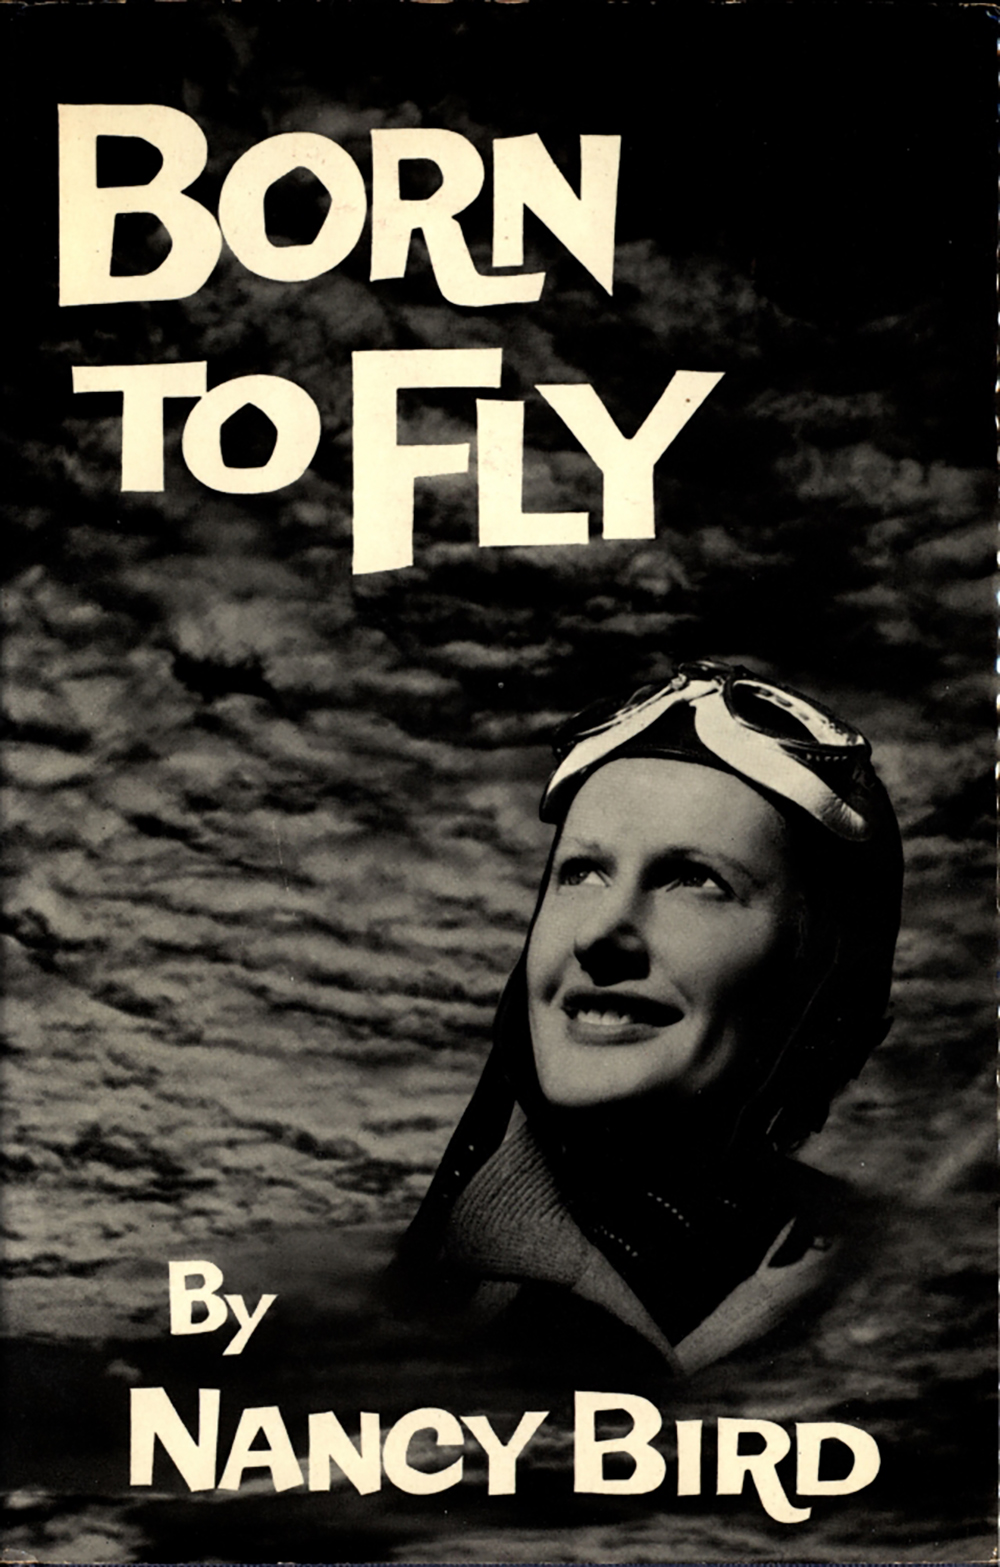 Image 4 of 5 - The front cover of one of Nancy Bird’s books. ‘BORN TO FLY’ reads at the top left and ‘BY NANCY BIRD’ reads at the bottom. The cover has an image of Nancy Bird with clouds behind her.